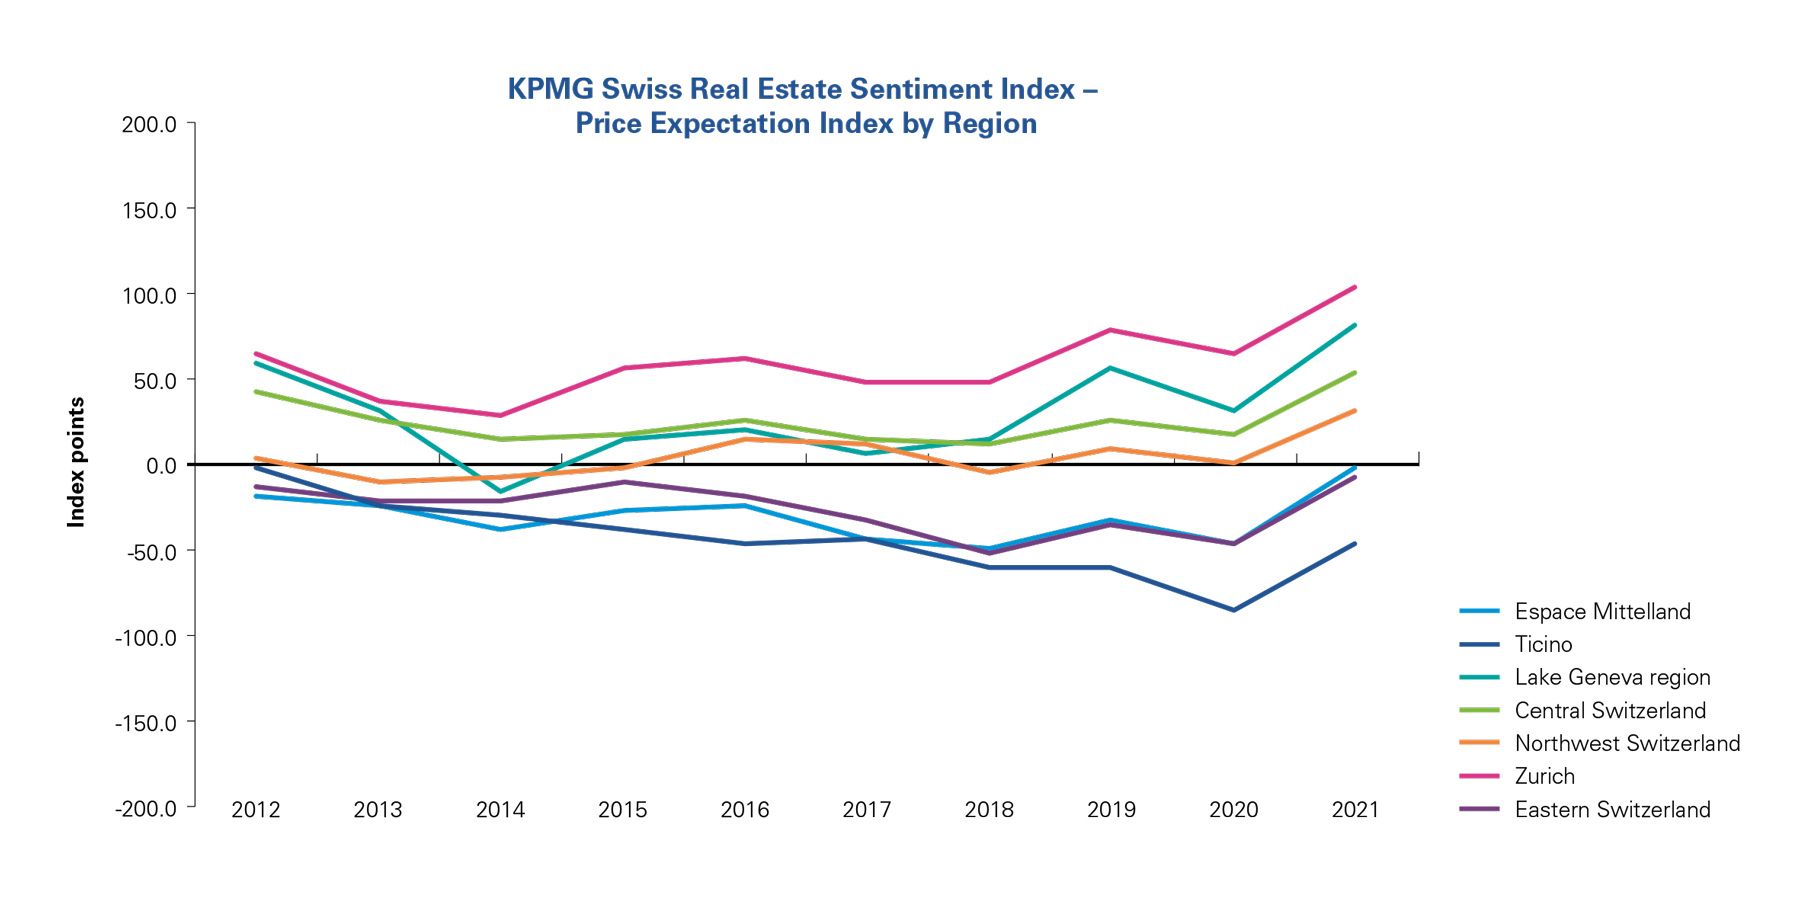 Price Expectation Index by Region